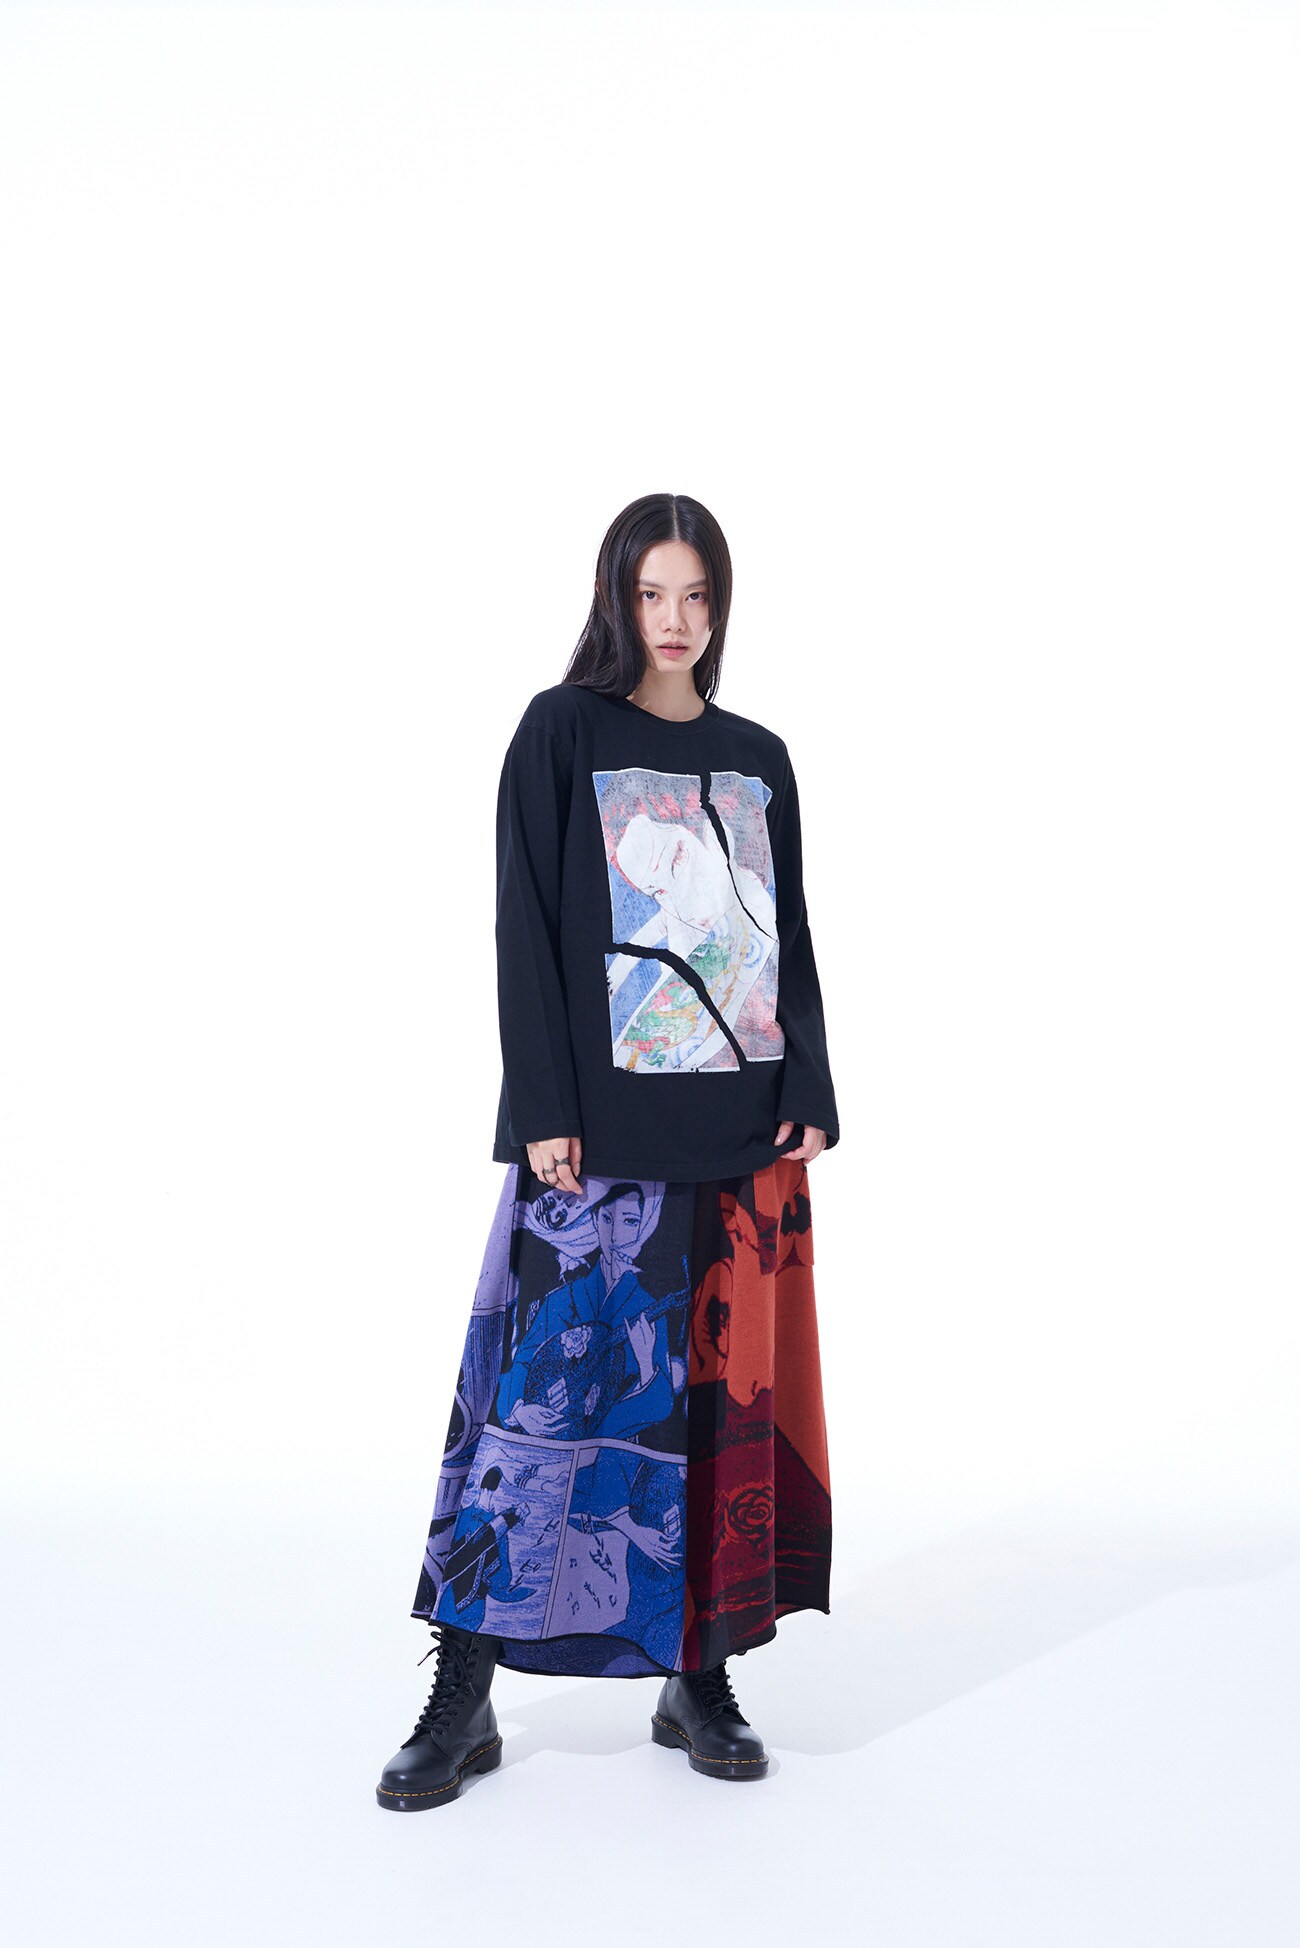 S'YTE x KAZUO KAMIMURA-MAGAZINE COVER ART-COTTON JERSEY LONG SLEEVE T-SHIRT WITH DISTRESSED PHOTOCOPIER PRINT